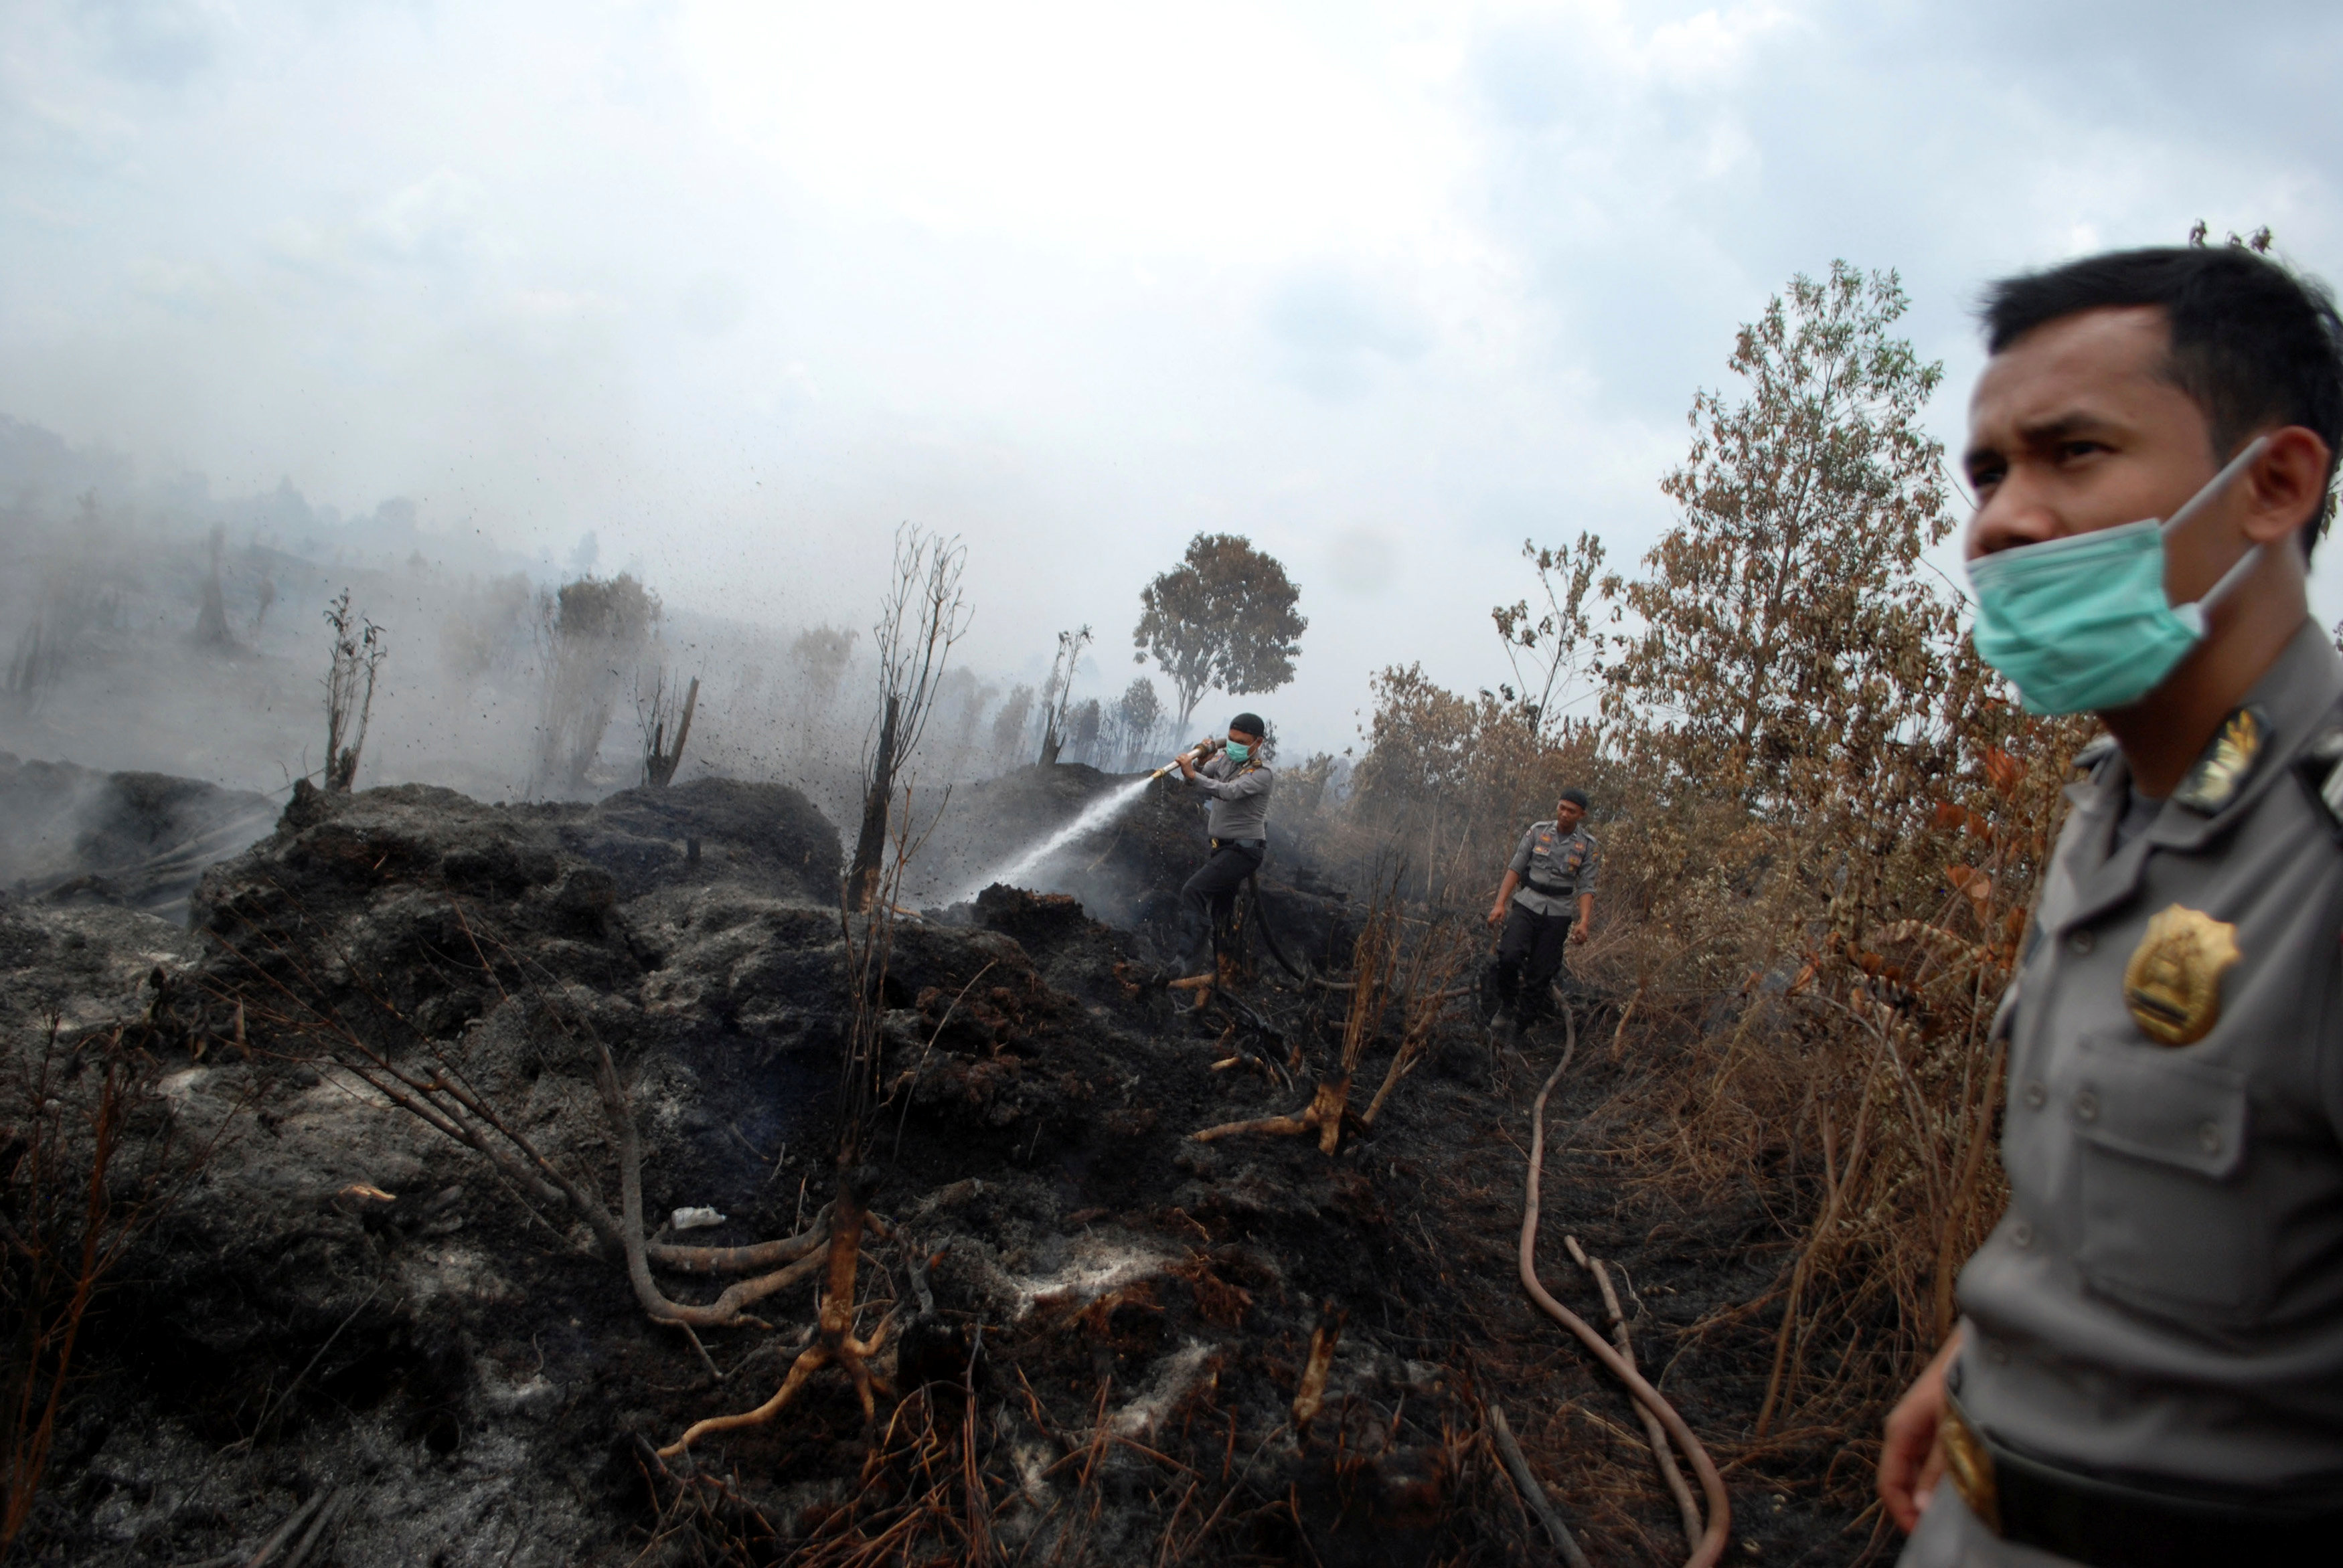 Indonesian council issues fatwa against forest fires